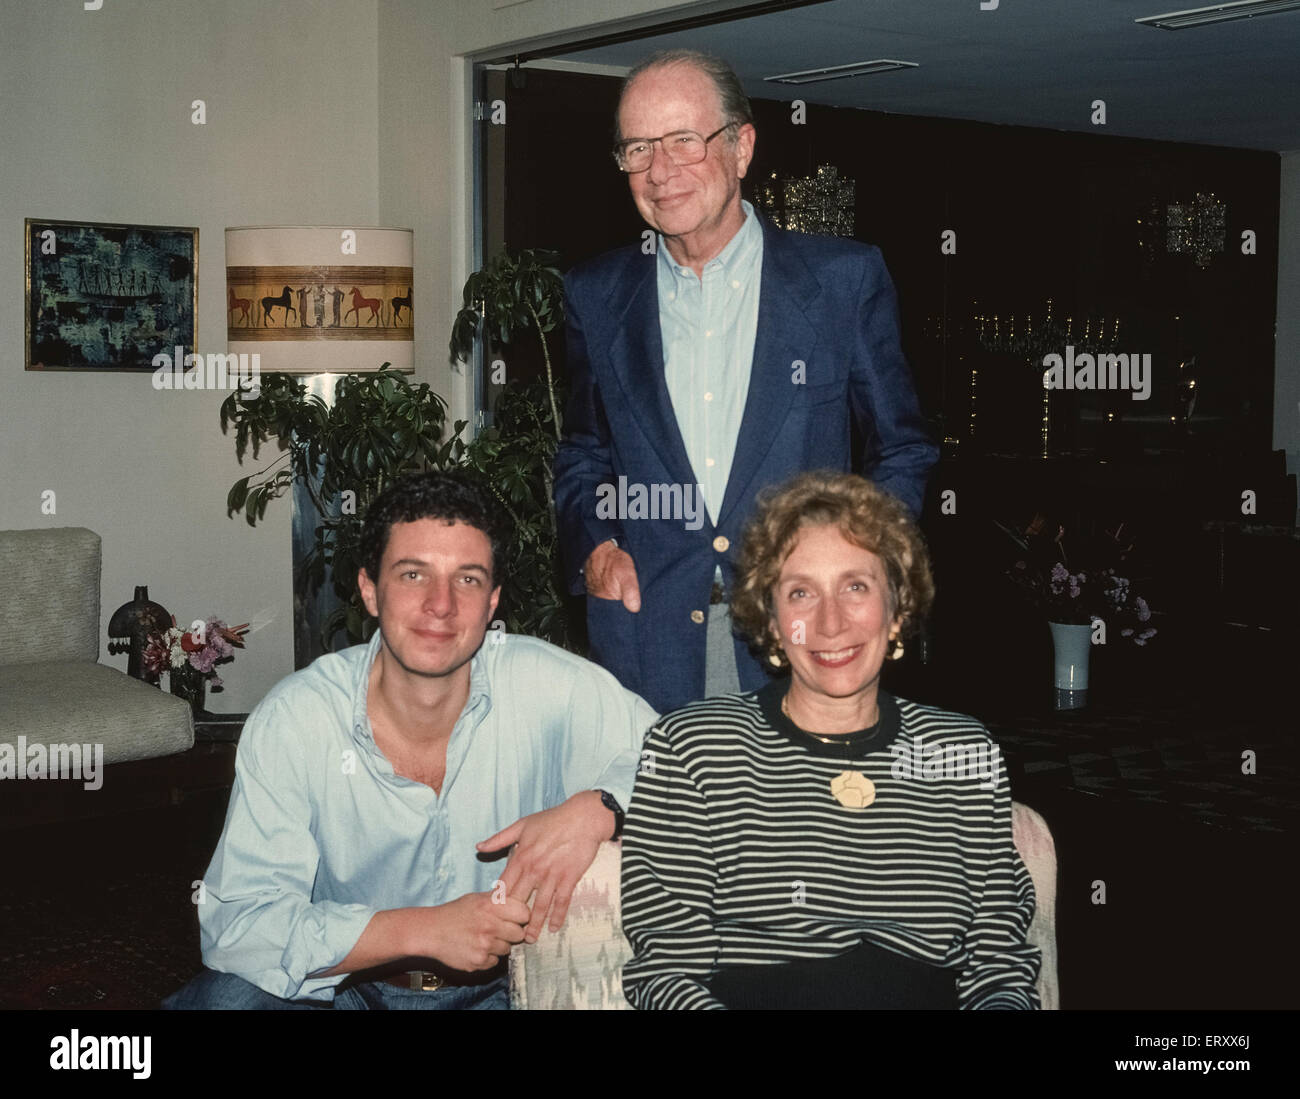 German-born Hans Stern, gemologist and founder of the worldwide H. Stern jewelry empire, stands for an informal portrait with his wife, Ruth, and the eldest of four sons, Roberto, in 1989 in their home in Rio de Janeiro, Brazil, South America. Stock Photo